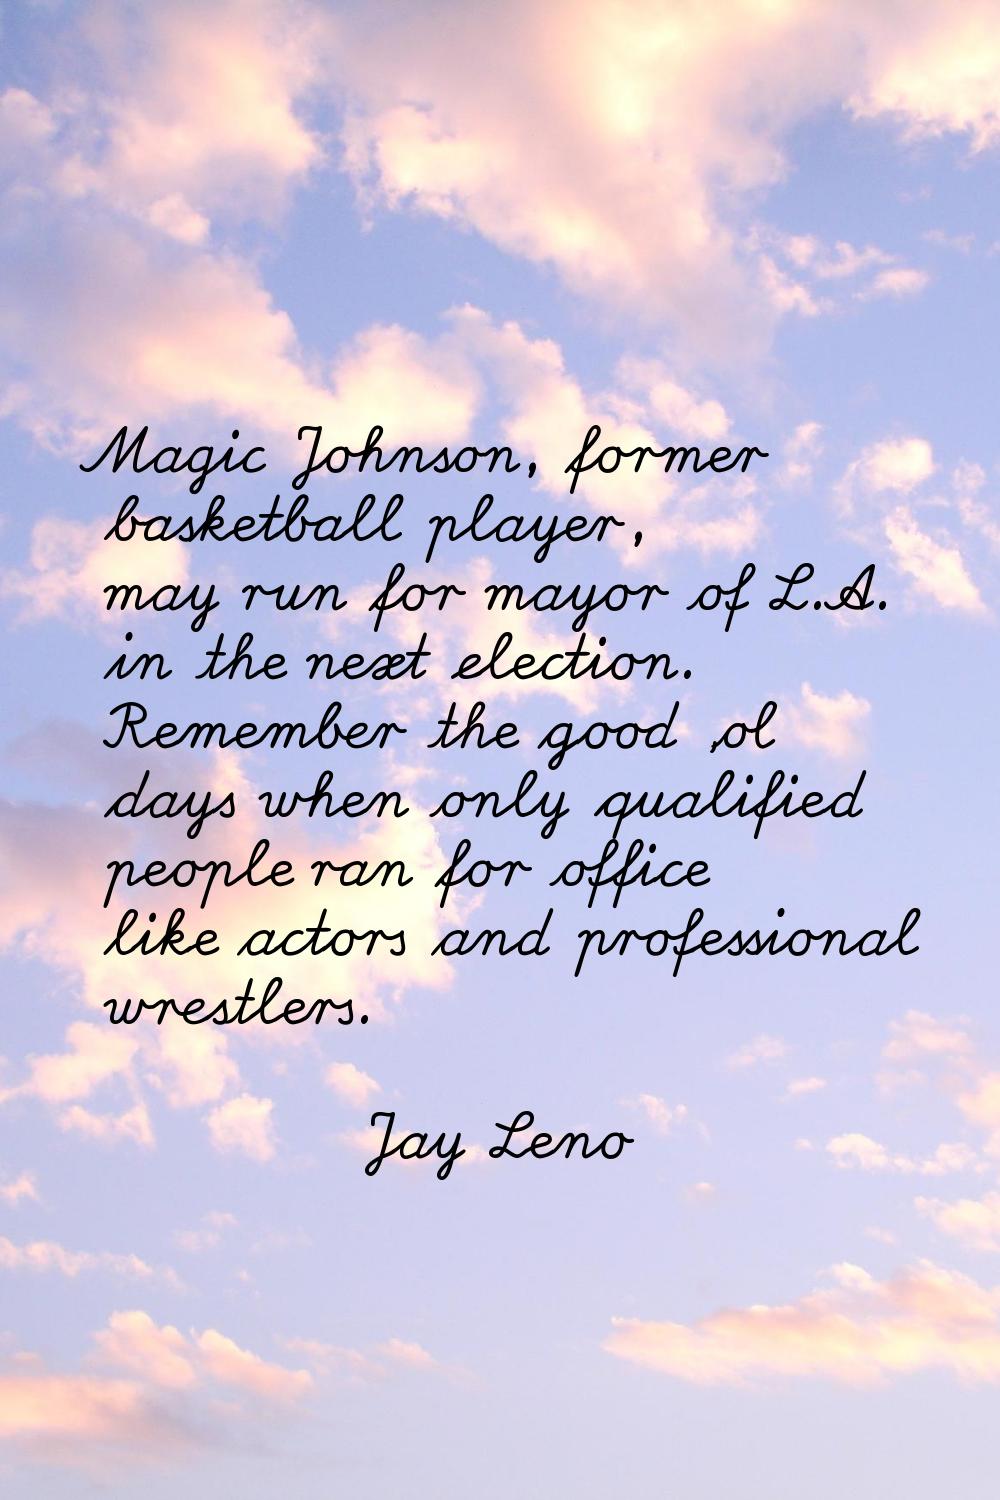 Magic Johnson, former basketball player, may run for mayor of L.A. in the next election. Remember t